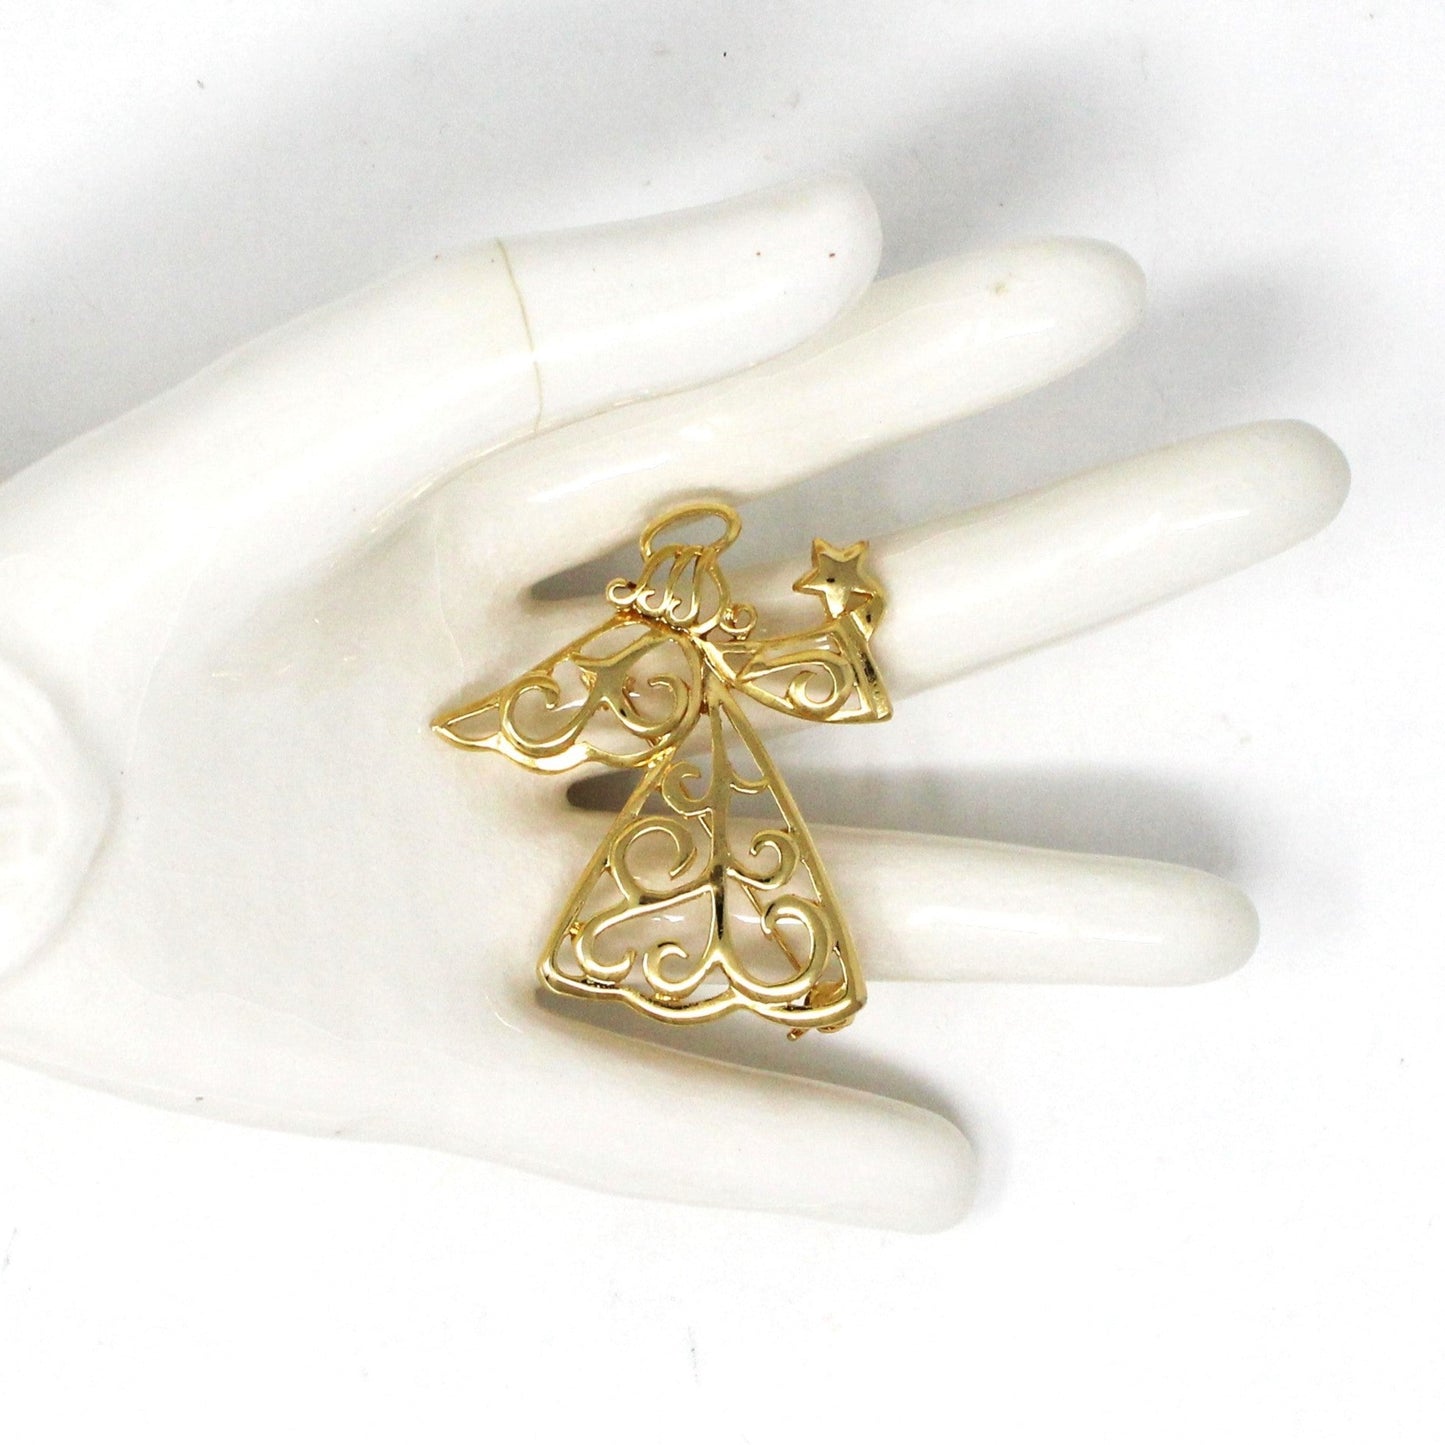 Brooch / Pin, Premier Designs, Filigree Angel with Star, Gold Plated, Signed